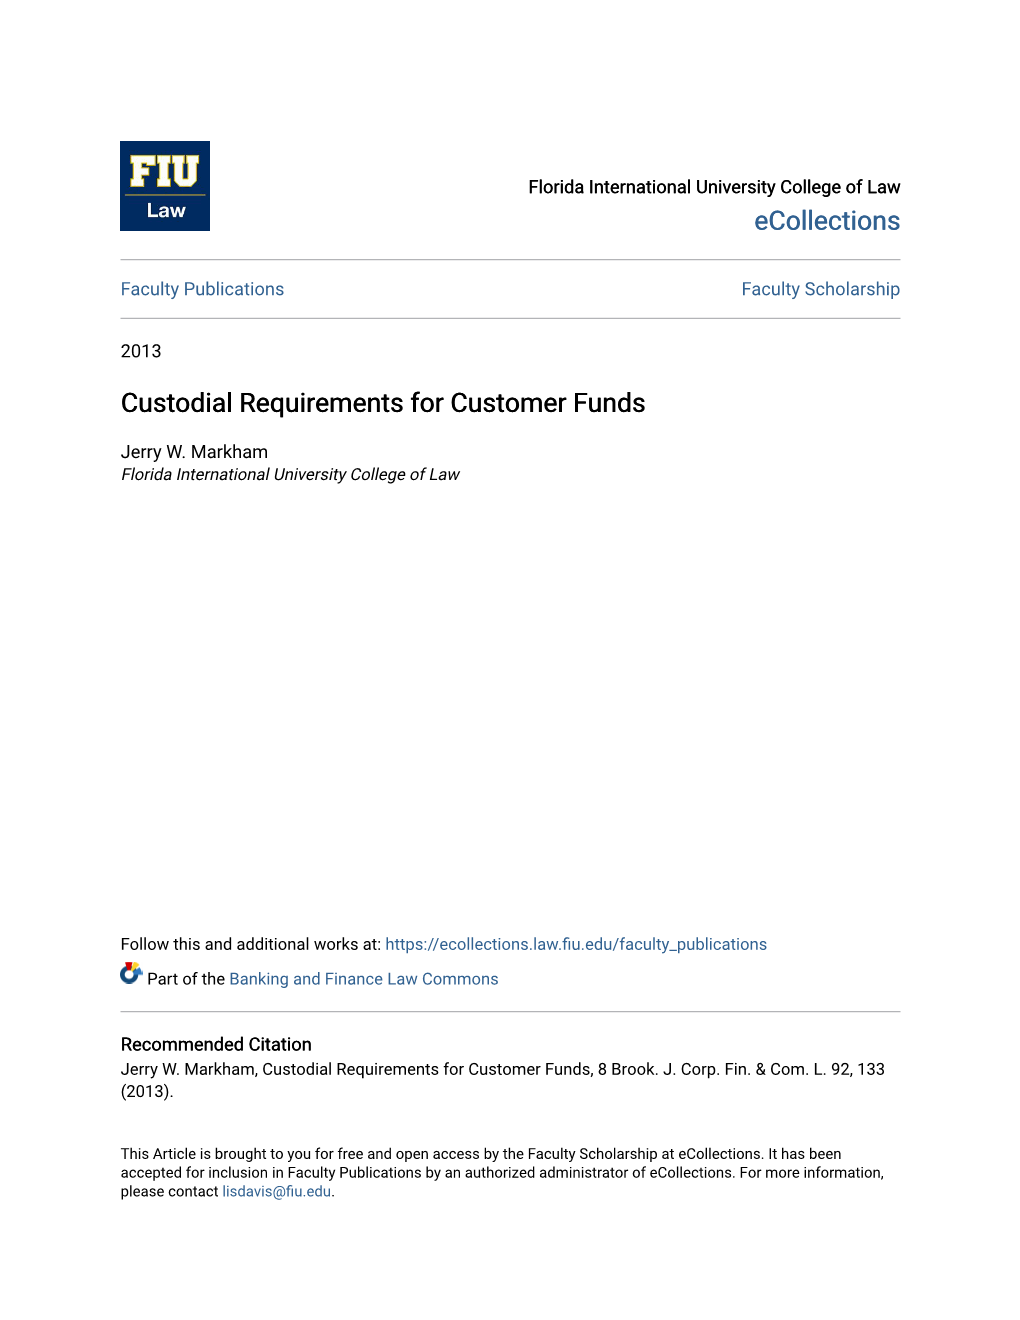 Custodial Requirements for Customer Funds